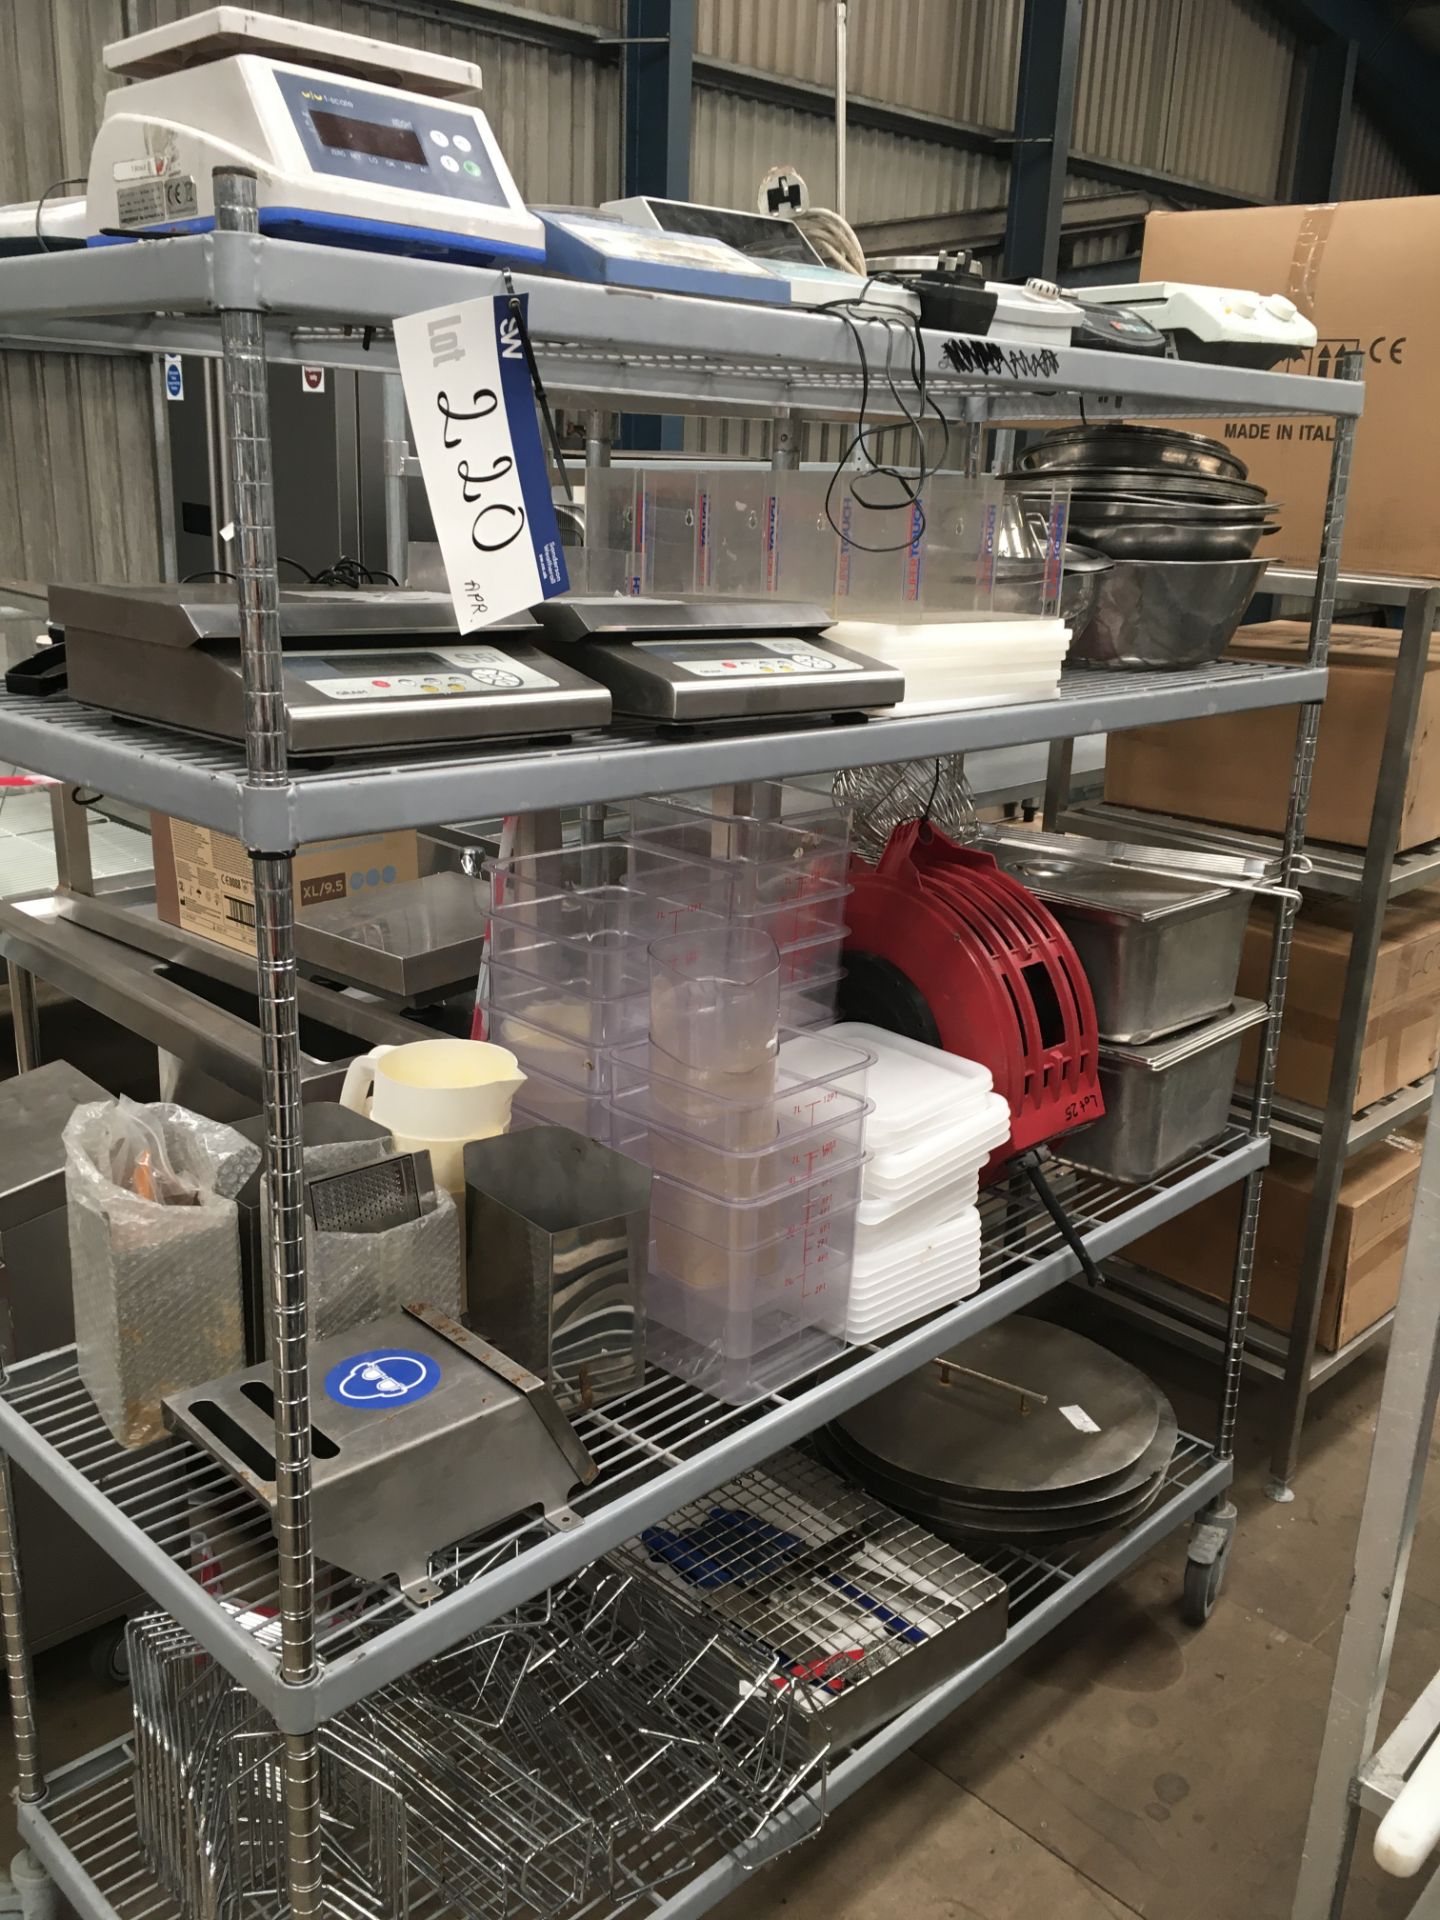 Mobile Rack, including five hot plates, three scales, eight plastic chopping boards, hose reel and